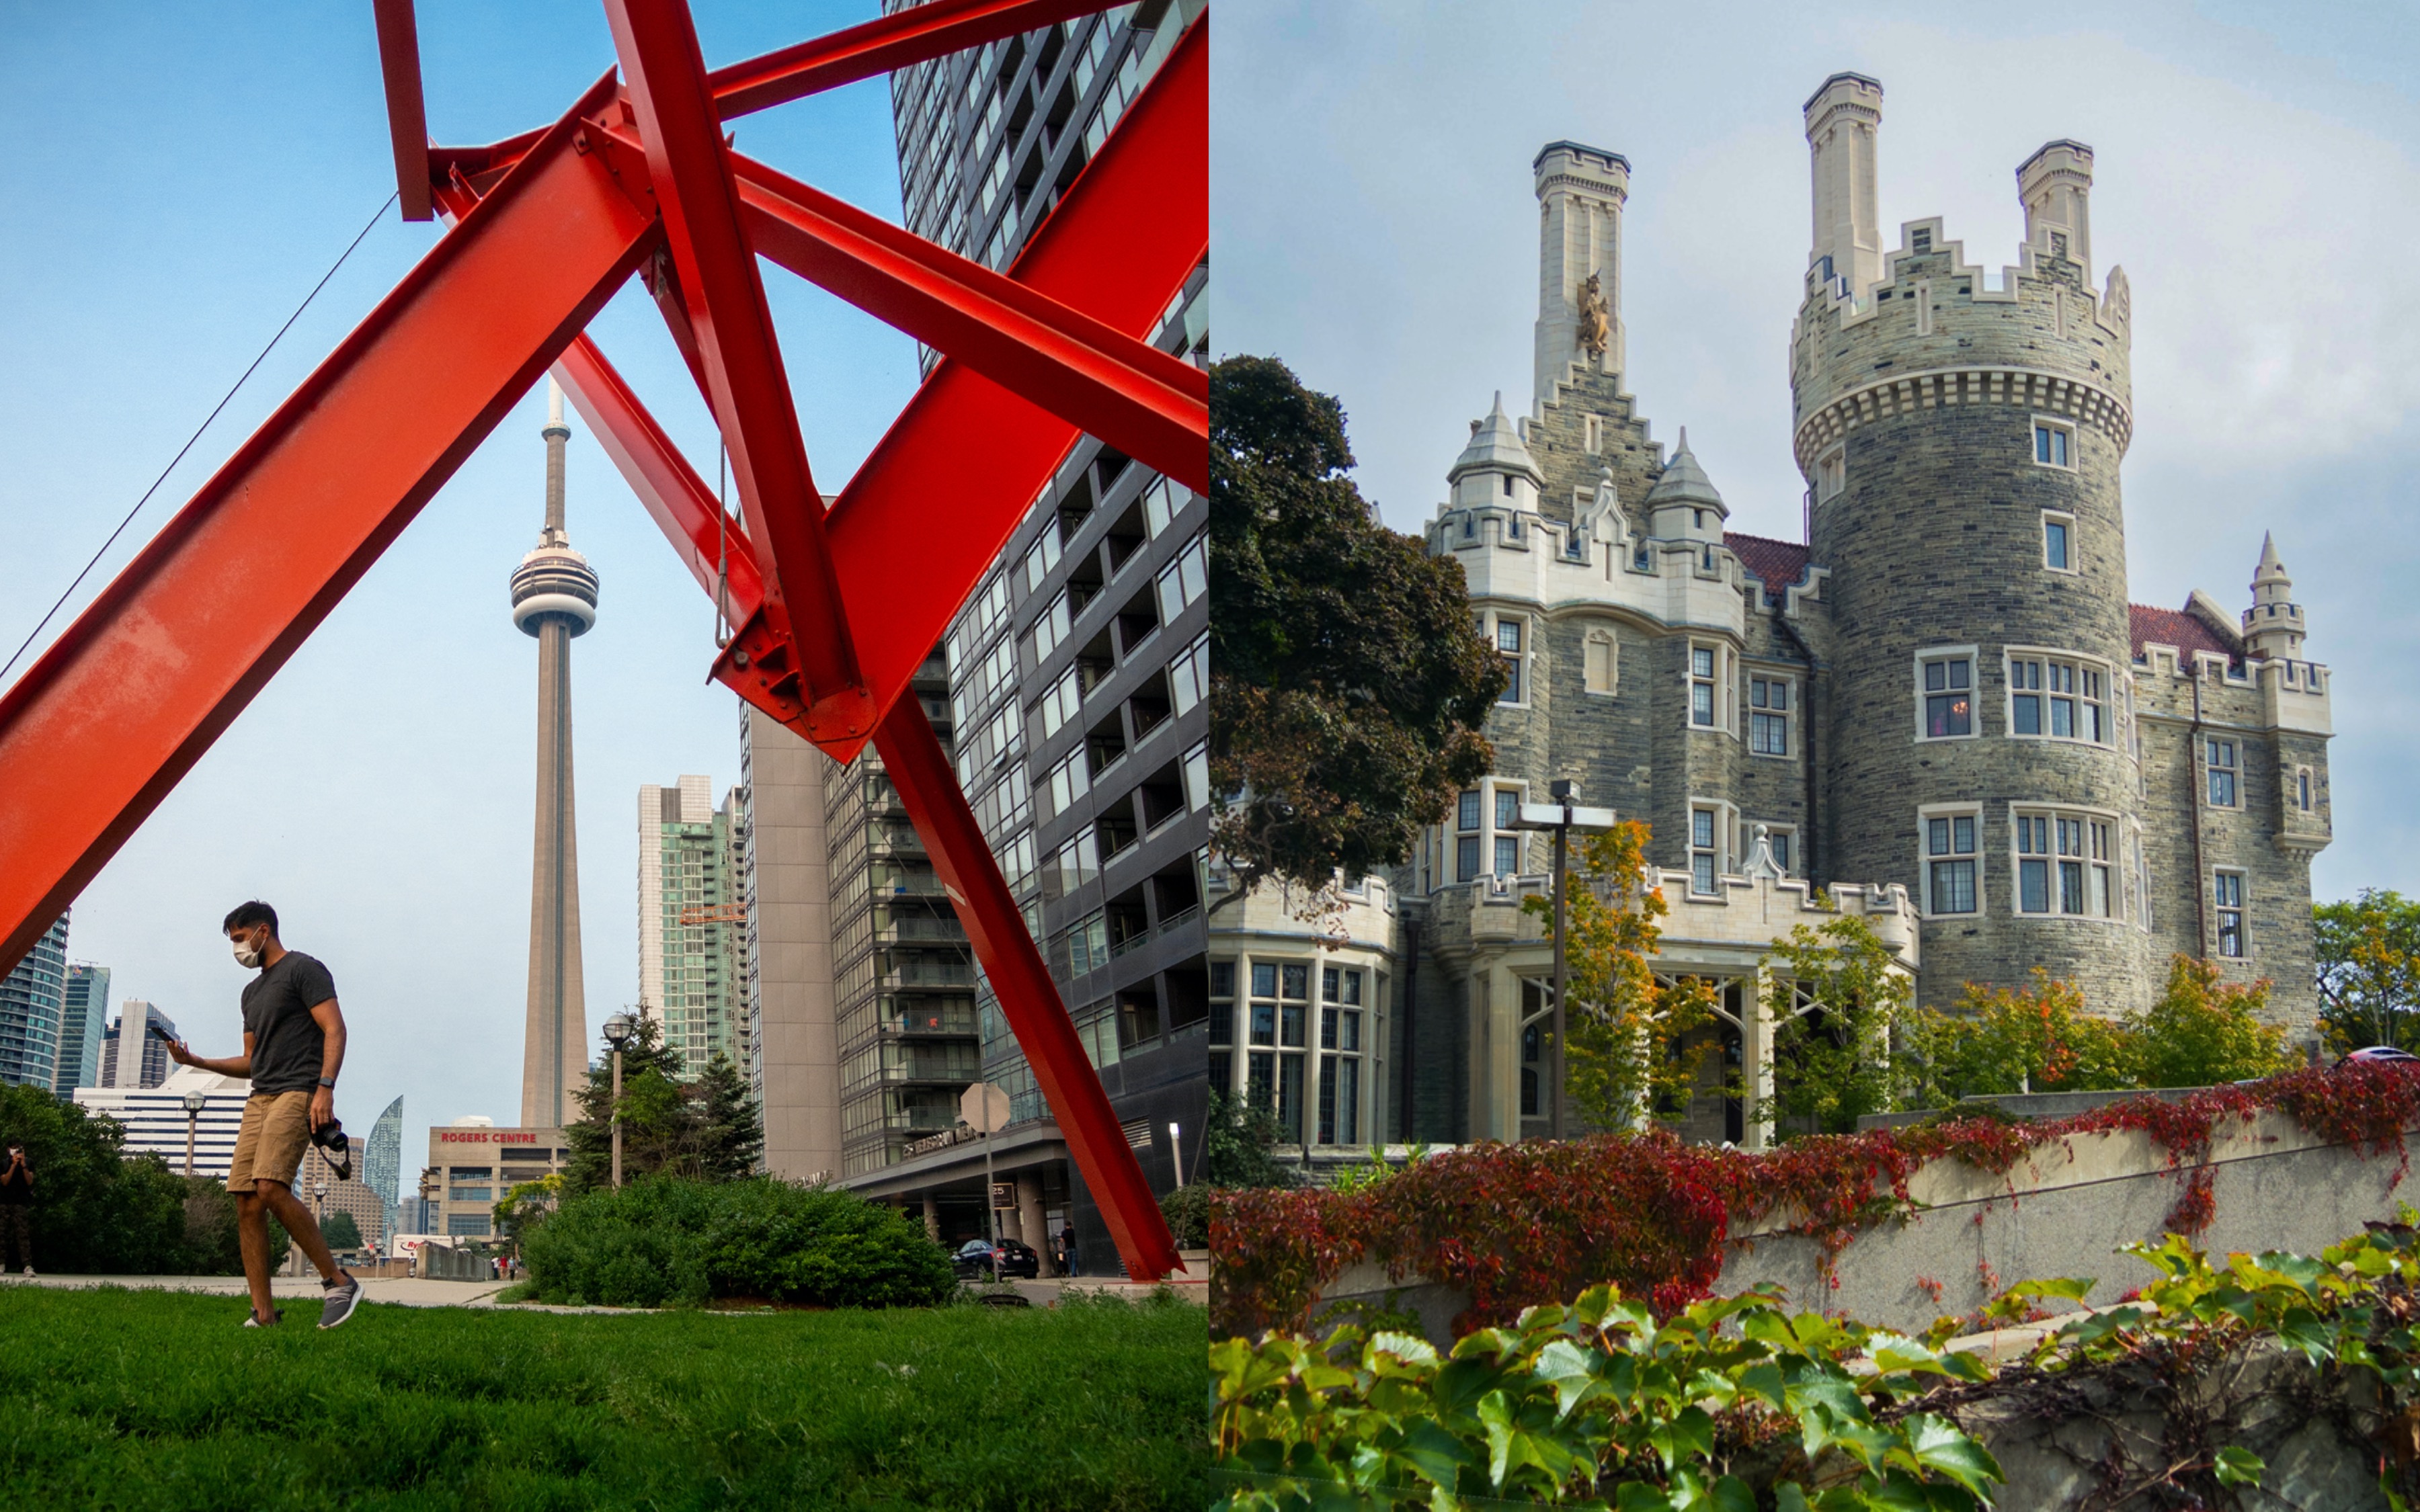 Tutoring in Toronto, Canada includes a Free Downtown Walking Tour with Me